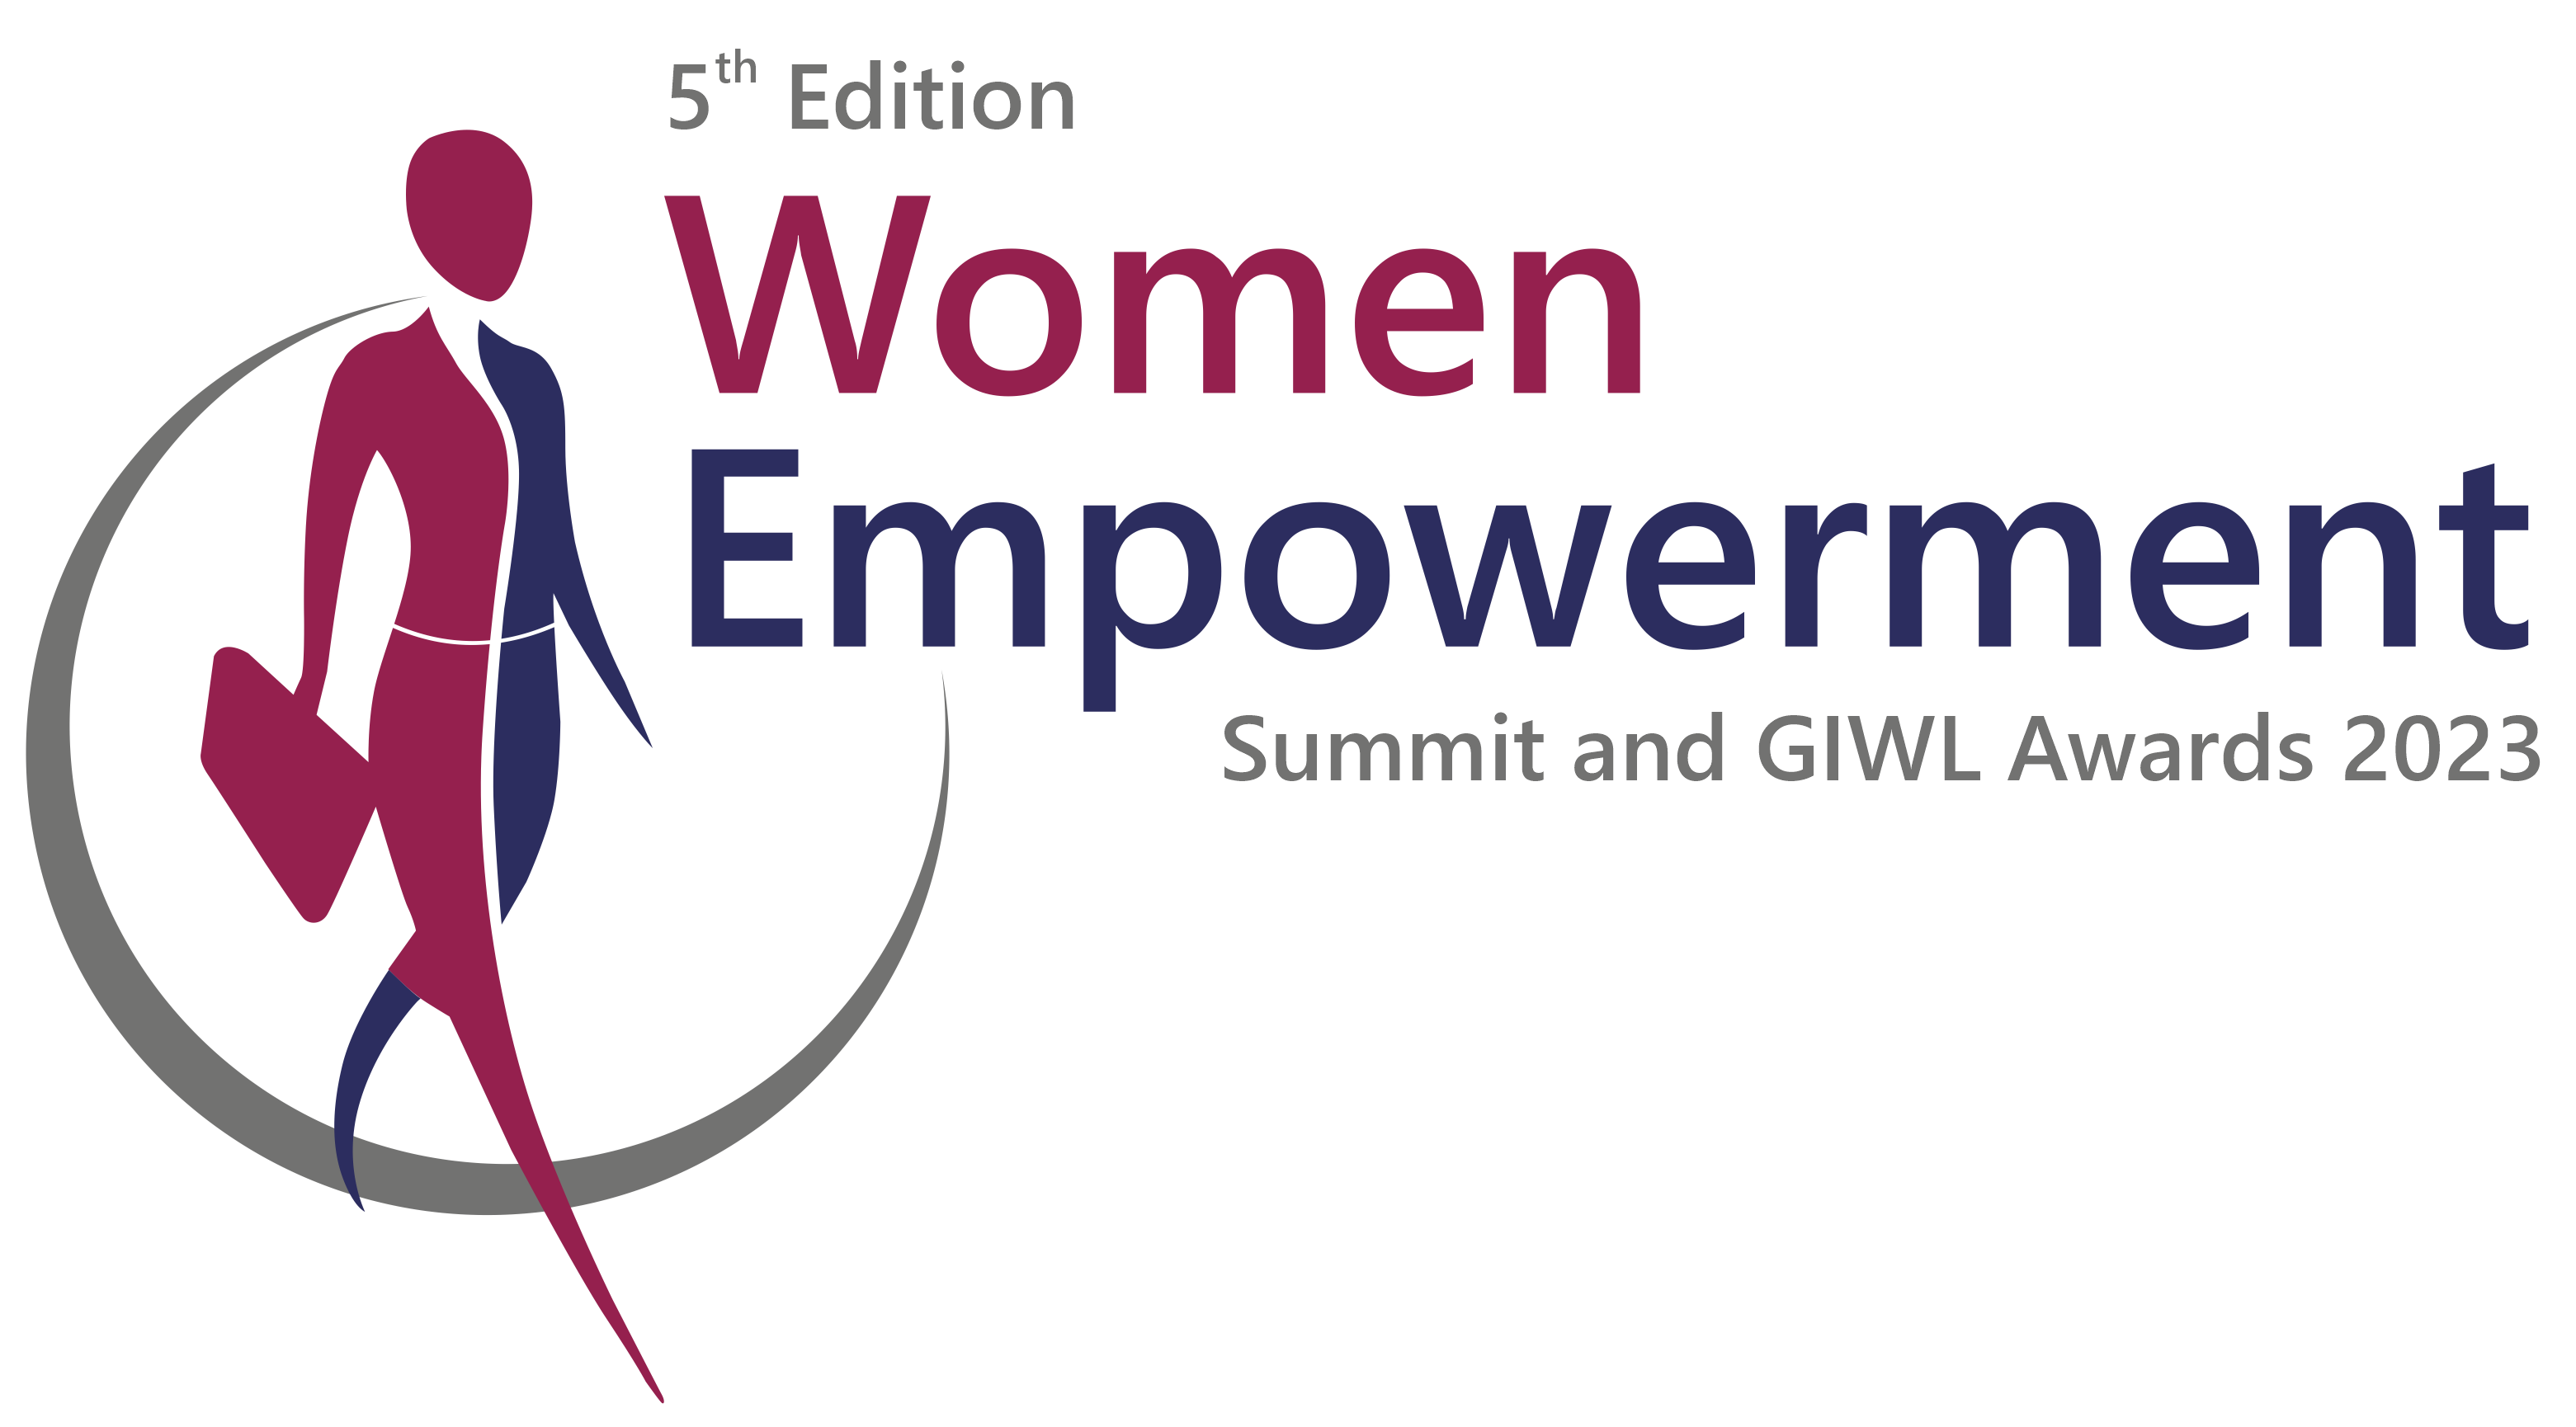 5th Edition Women empowerment and GIWL Awards 2023